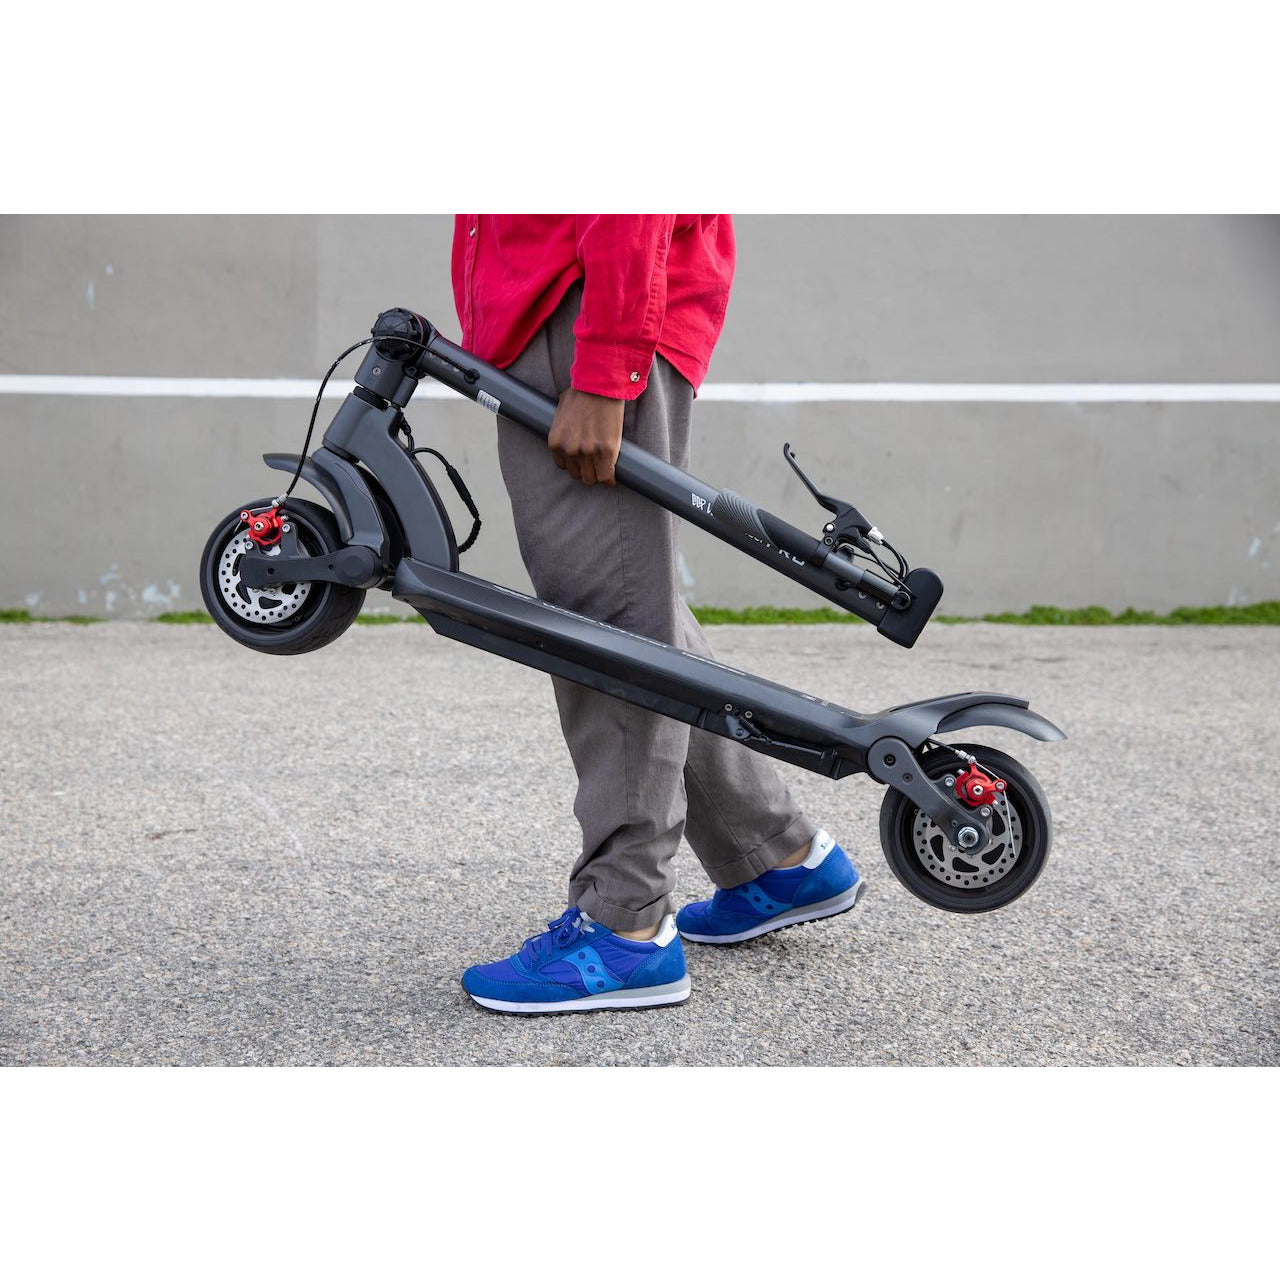 https://cdn.shopifycdn.net/s/files/1/0273/7691/0433/products/glarewheel-48v-720wh-1000w-adult-commuter-folding-electric-scooter-es-s11pro-28413877584069.jpg?v=1618910345